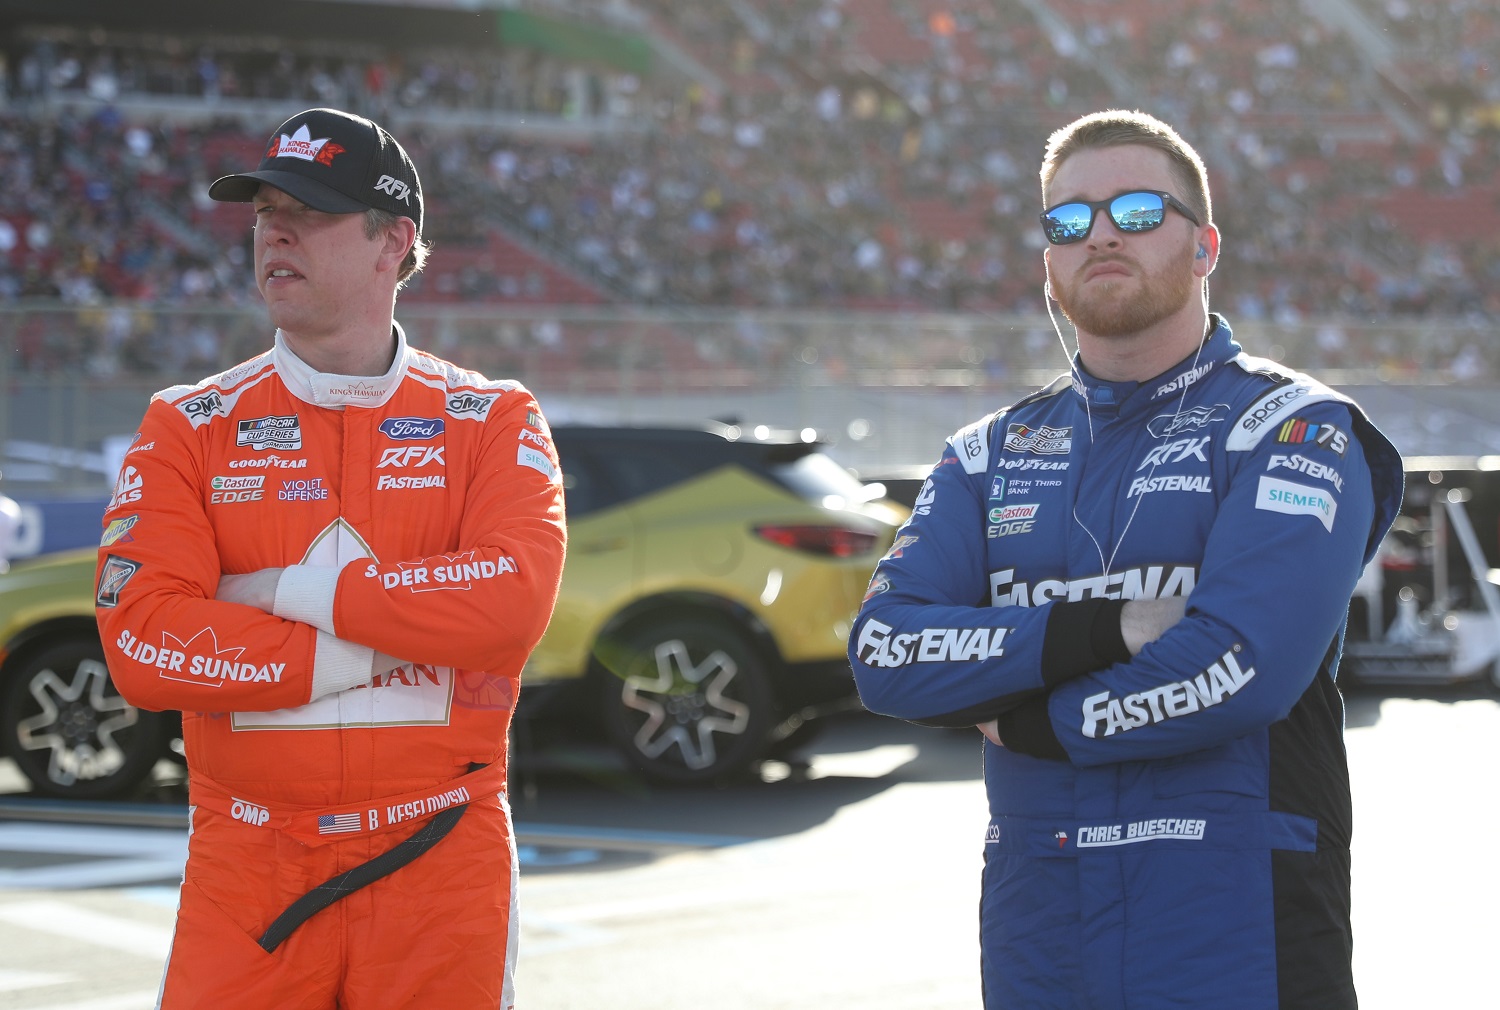 Brad Keselowski and Chris Buescher look on during qualifying heats for the Busch Light Clash at Los Angeles Coliseum on Feb. 5, 2023.